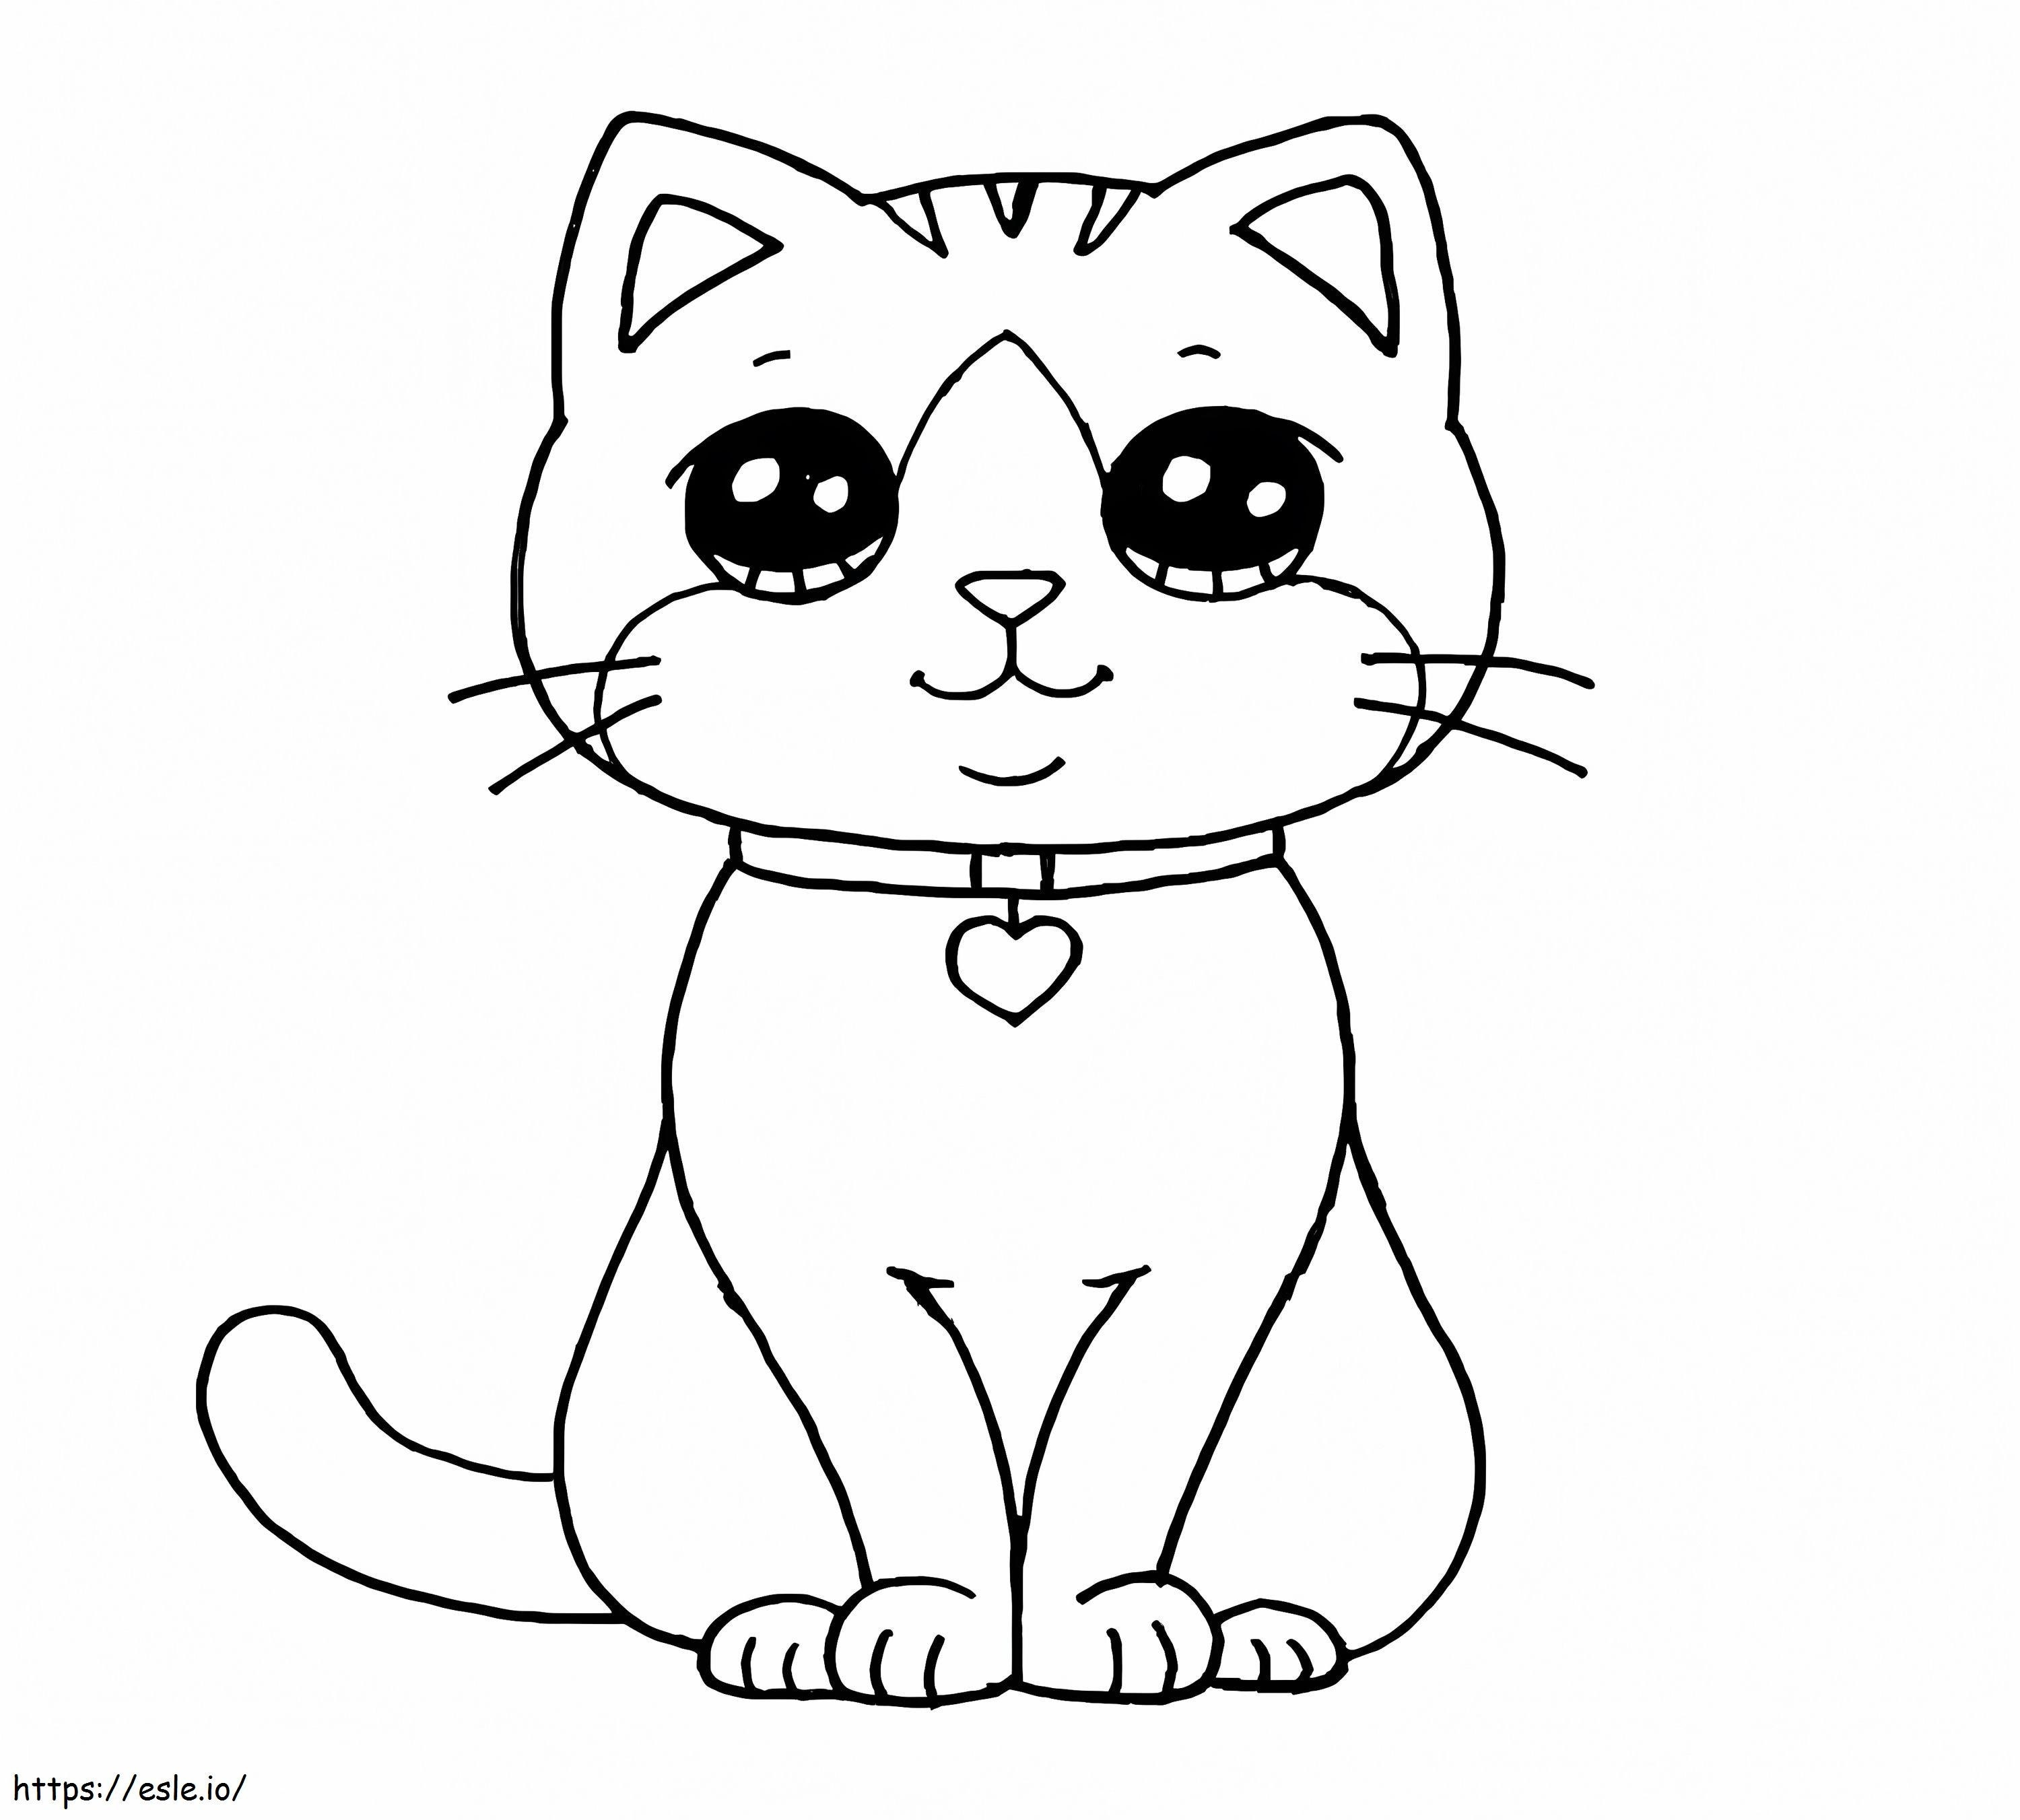 Sitting Cat coloring page